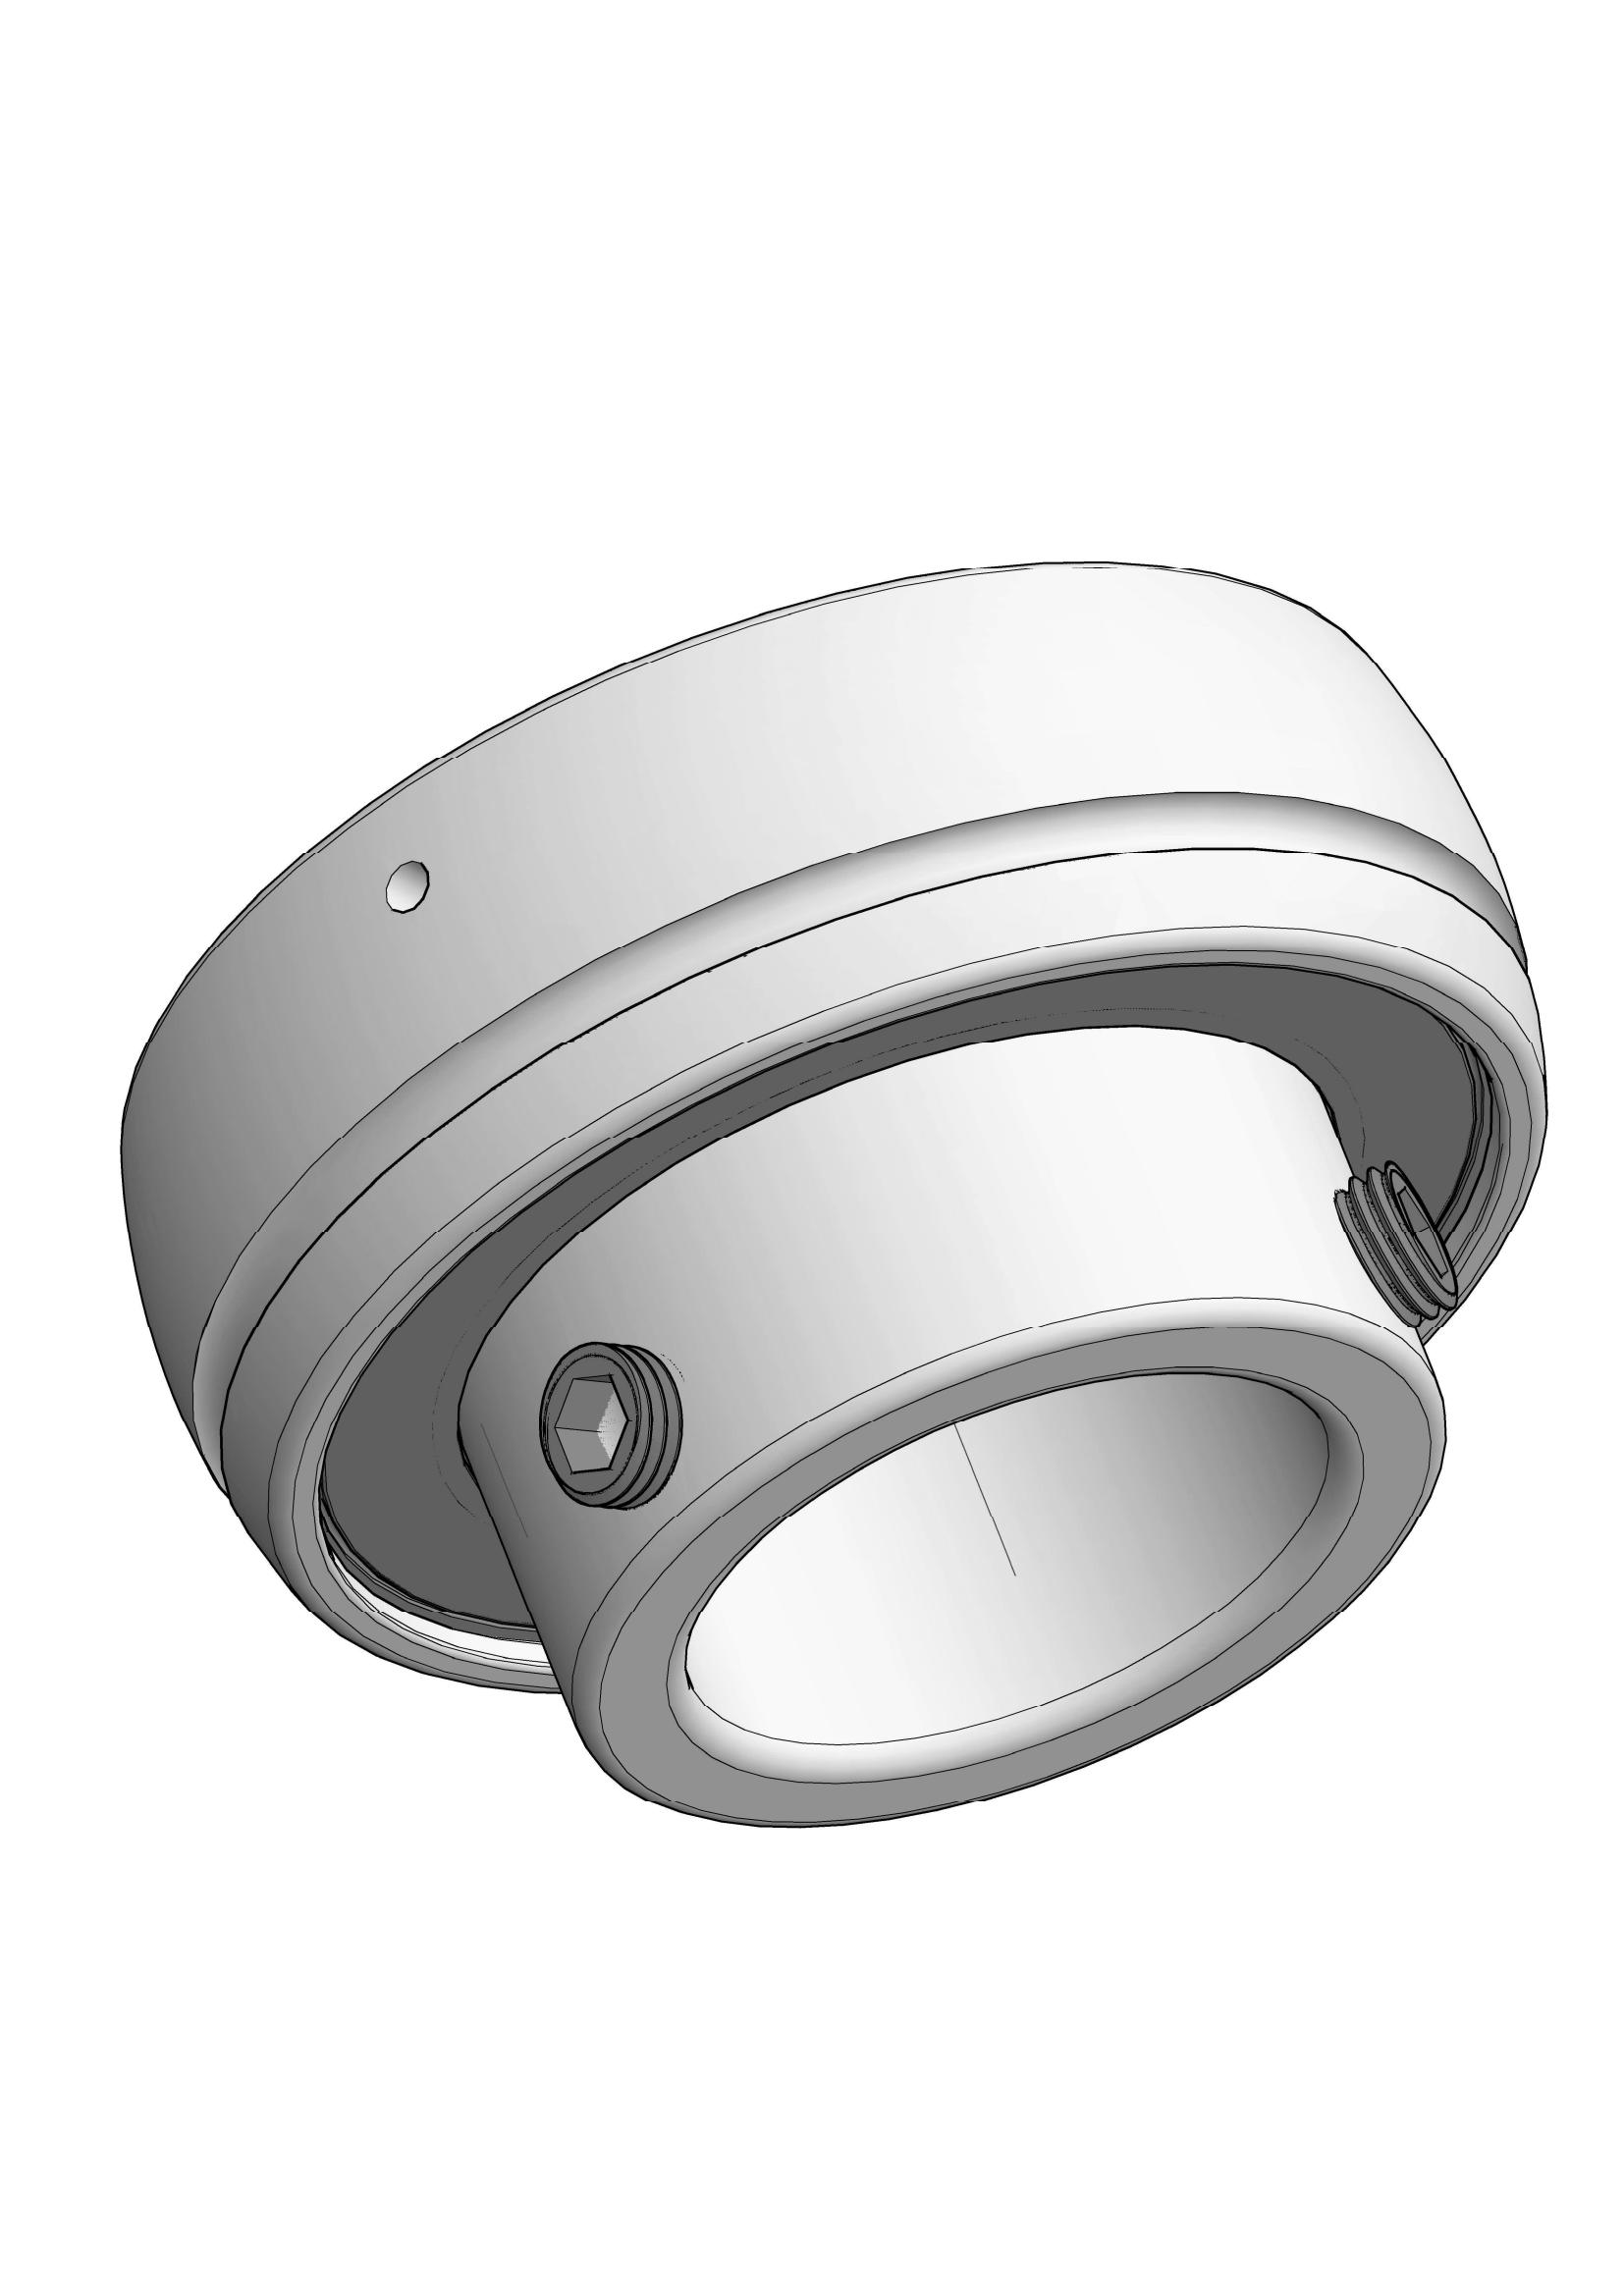 SB208-25 insert ball bearings with Eccentric Collar Lock with 1-9/16 inch Bore